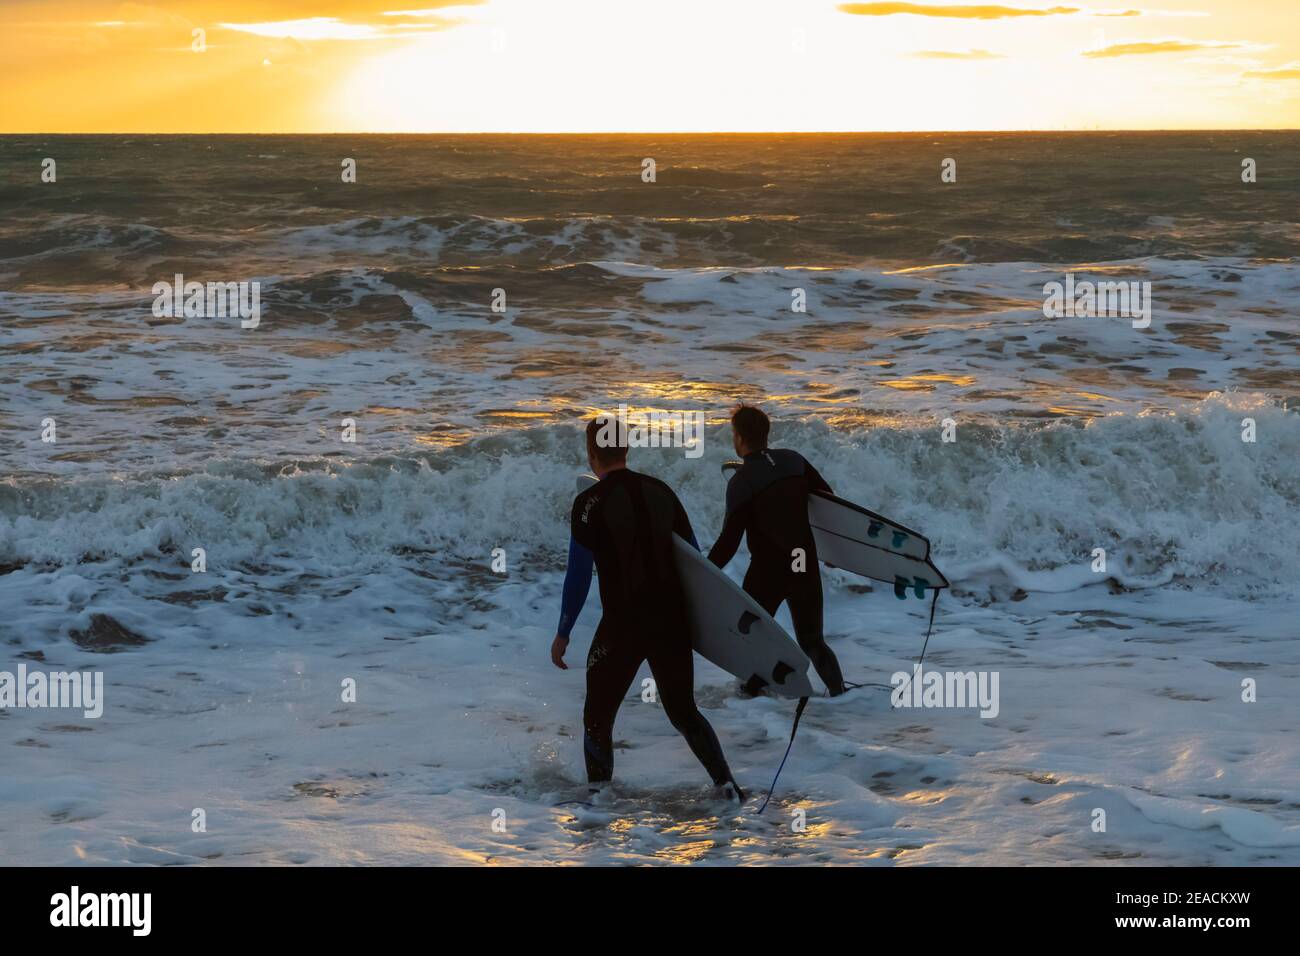 Angleterre, East Sussex, Eastbourne, Birling Gap, Seven Sisters Cliffs and Beach, Two Male Surfers Walking on Beach transportant des planches de surf Banque D'Images